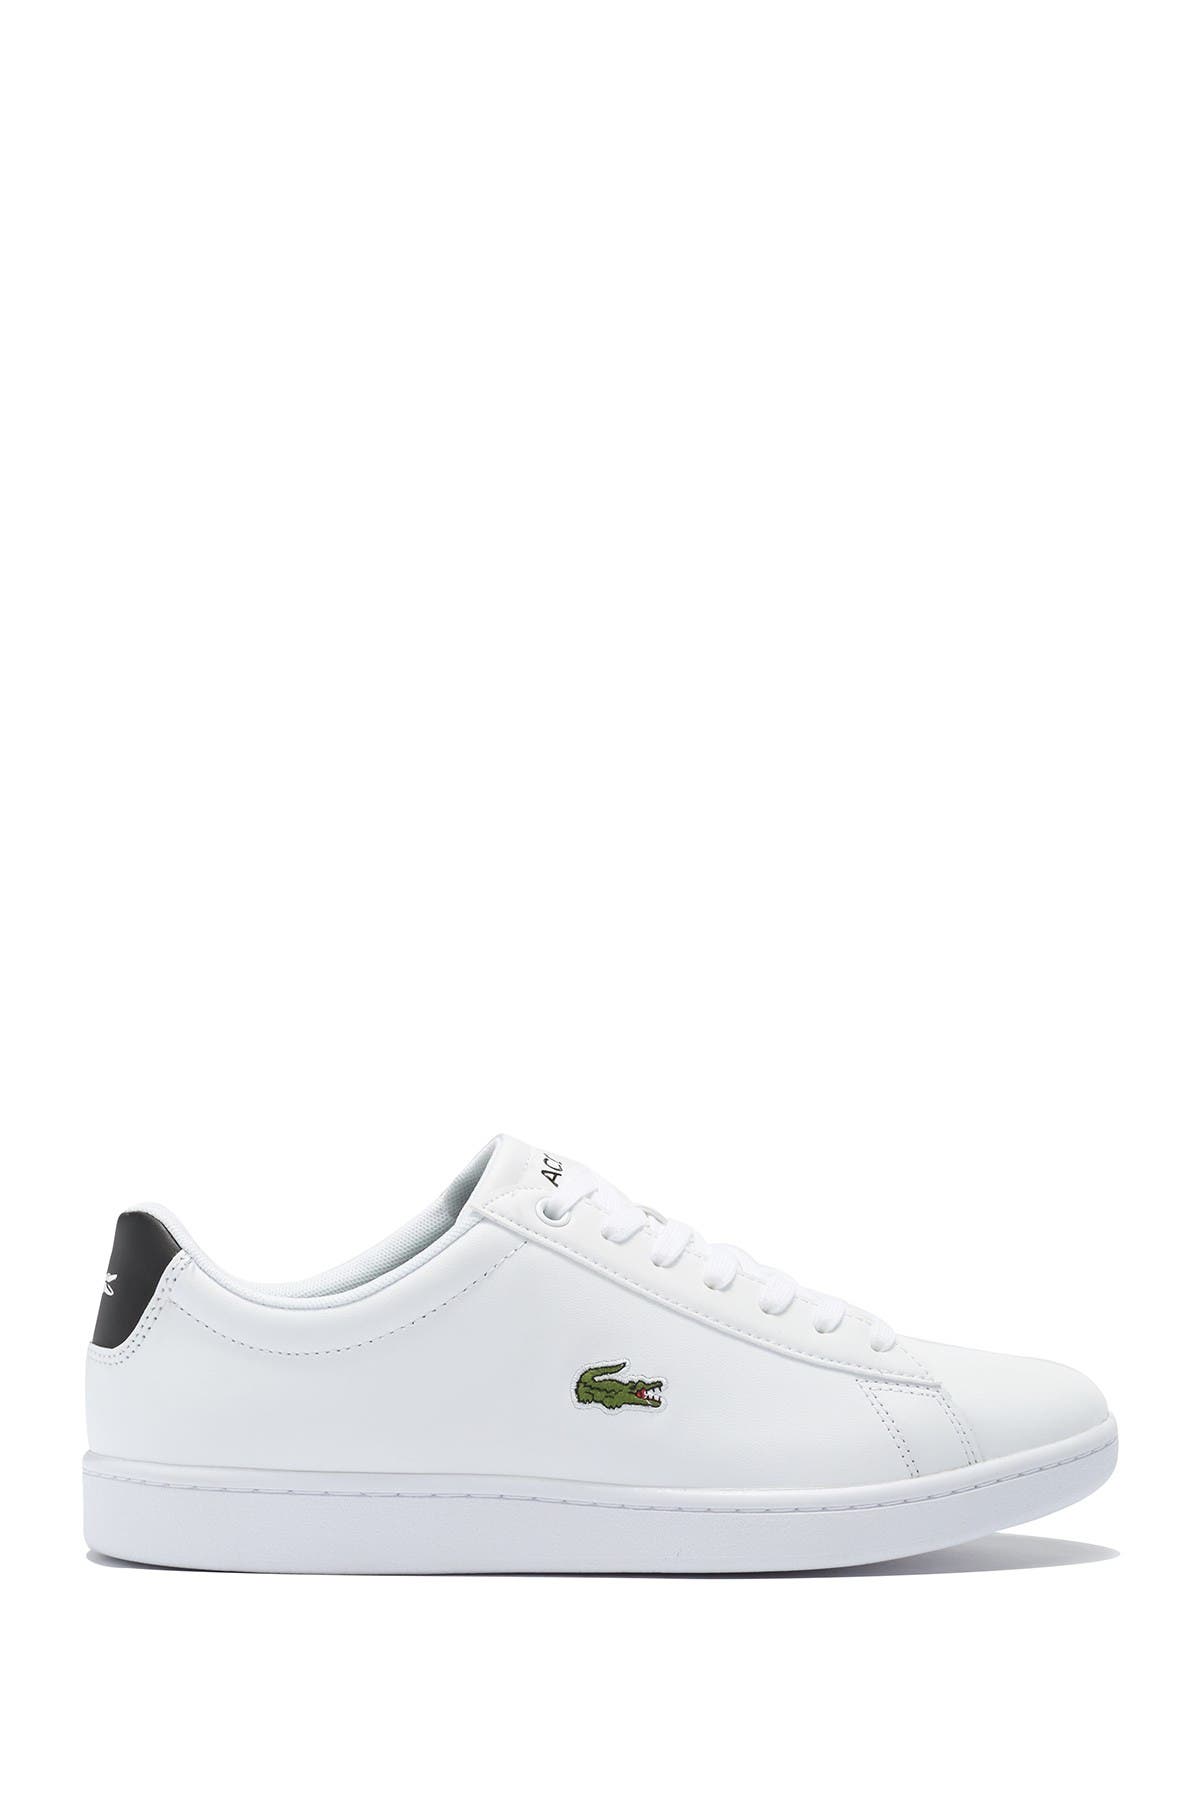 Lacoste | Hydez 318 1 Leather Sneaker 